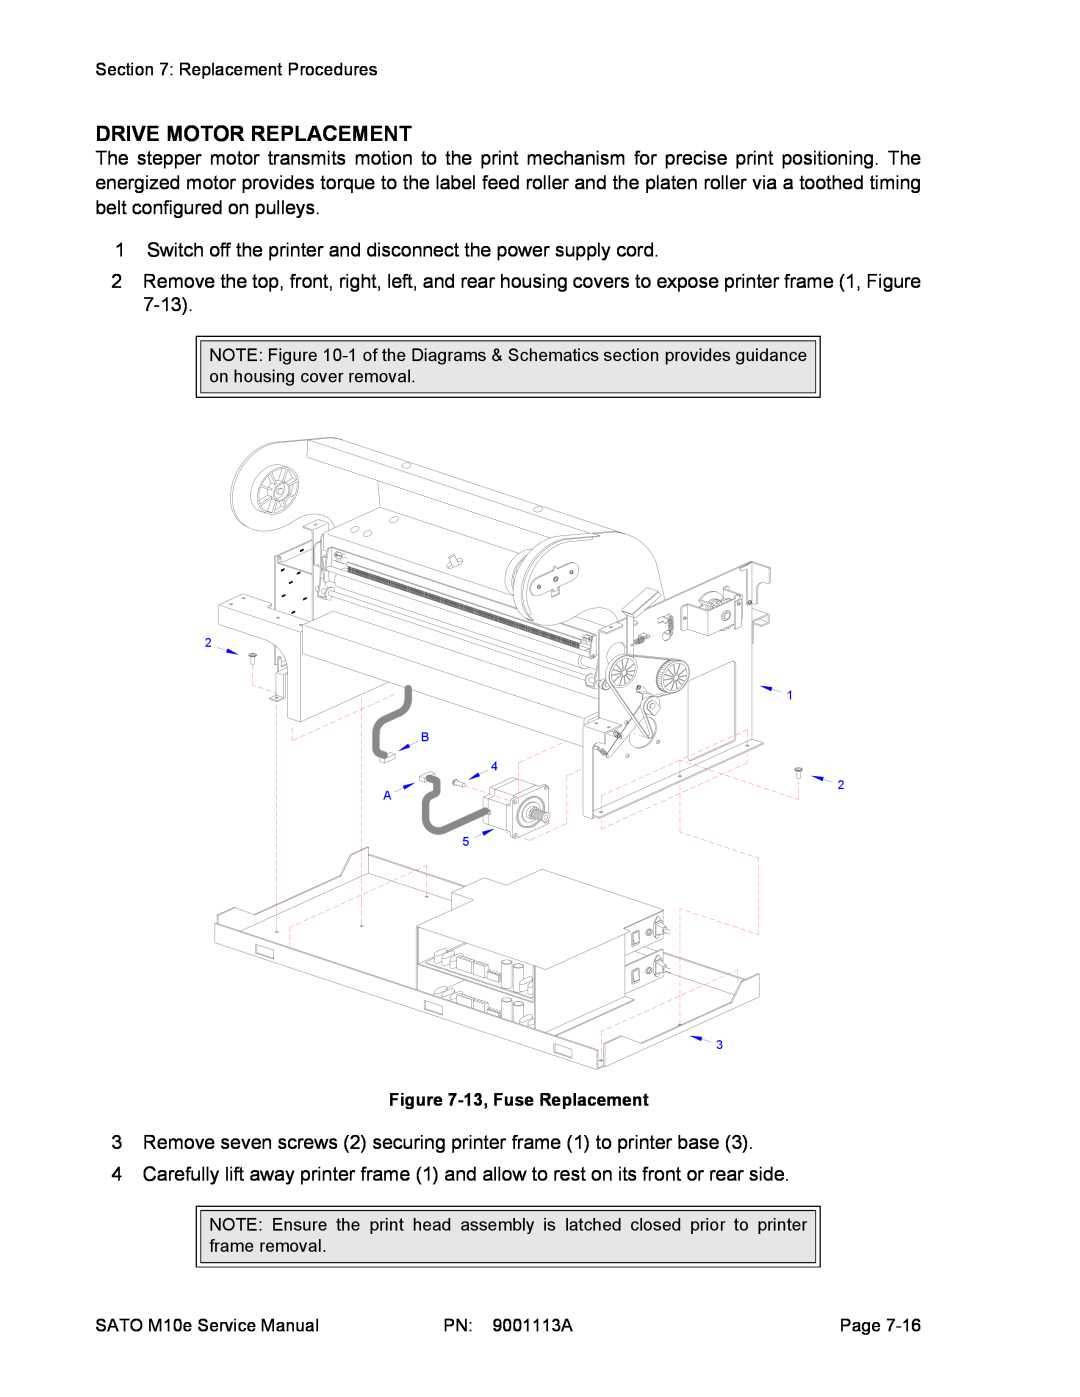 SATO 10e service manual Drive Motor Replacement, 13, Fuse Replacement 